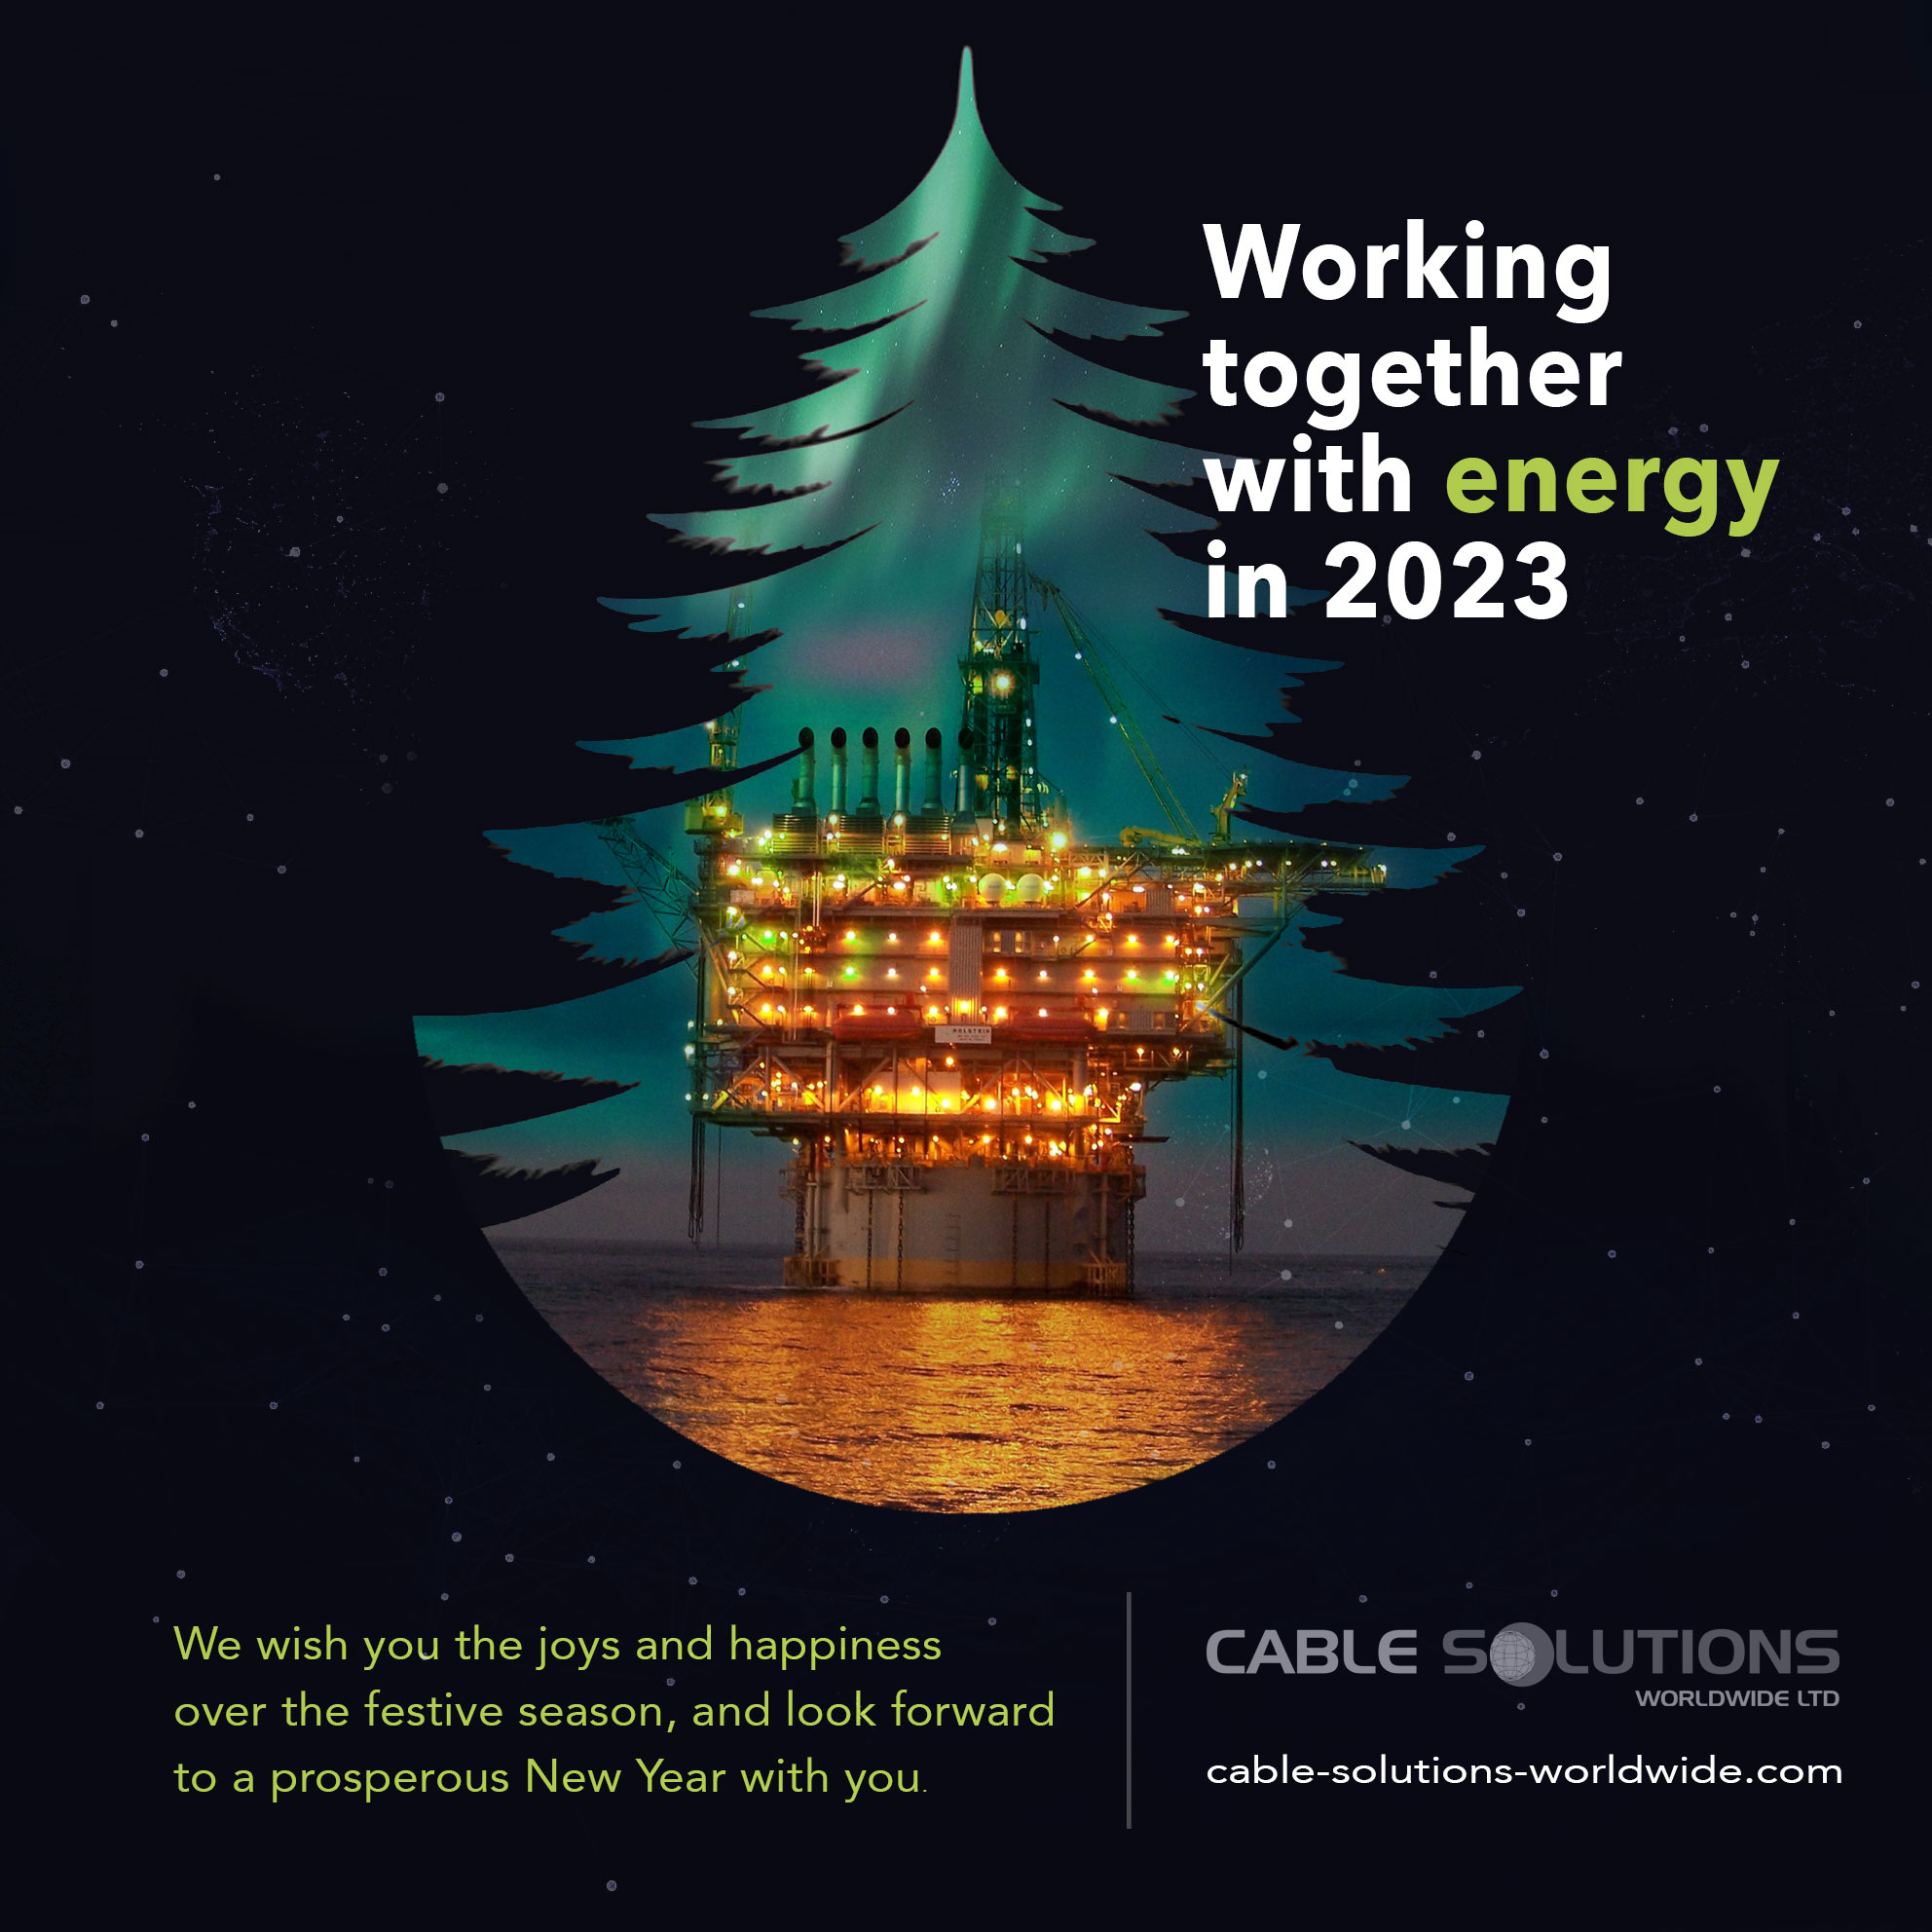 pulling together with energy in 2023